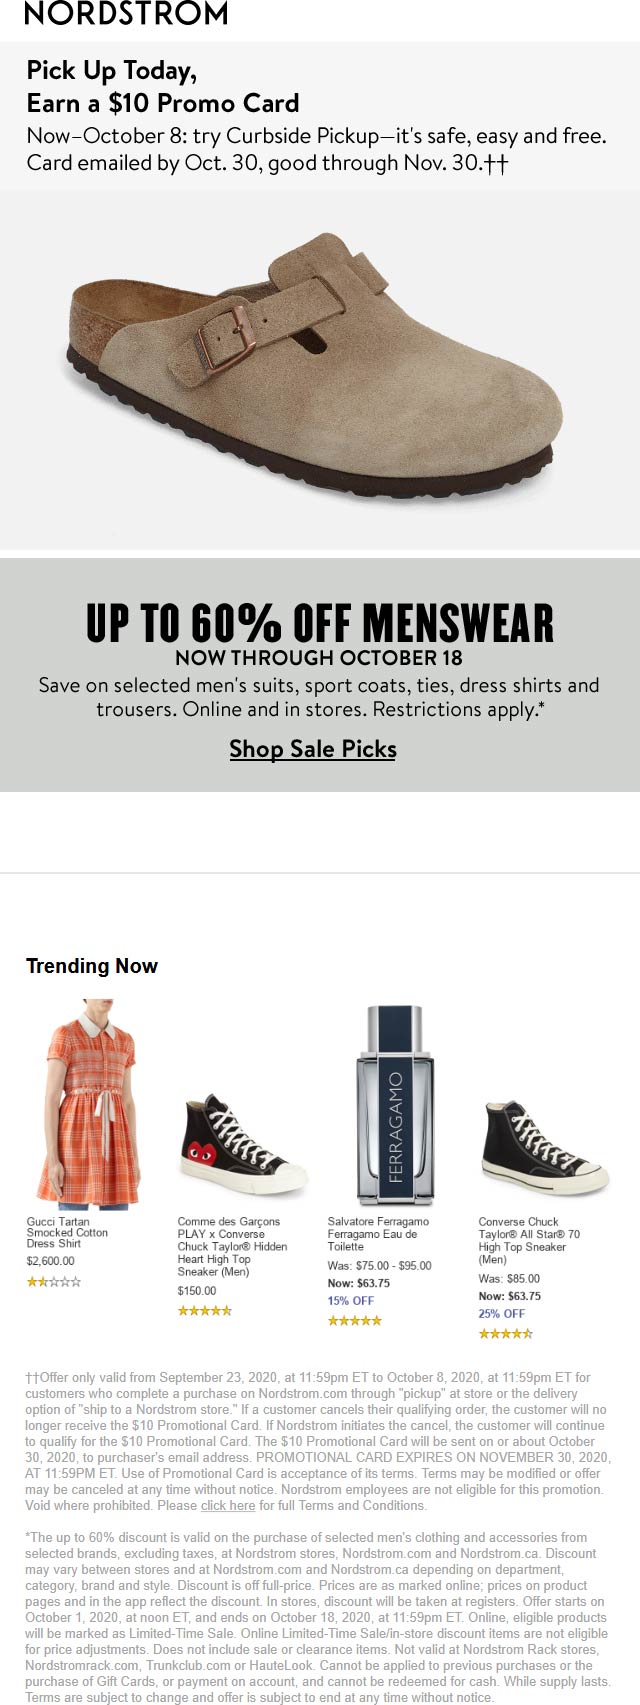 Nordstrom stores Coupon  Free $10 card with curbside pickup at Nordstrom #nordstrom 